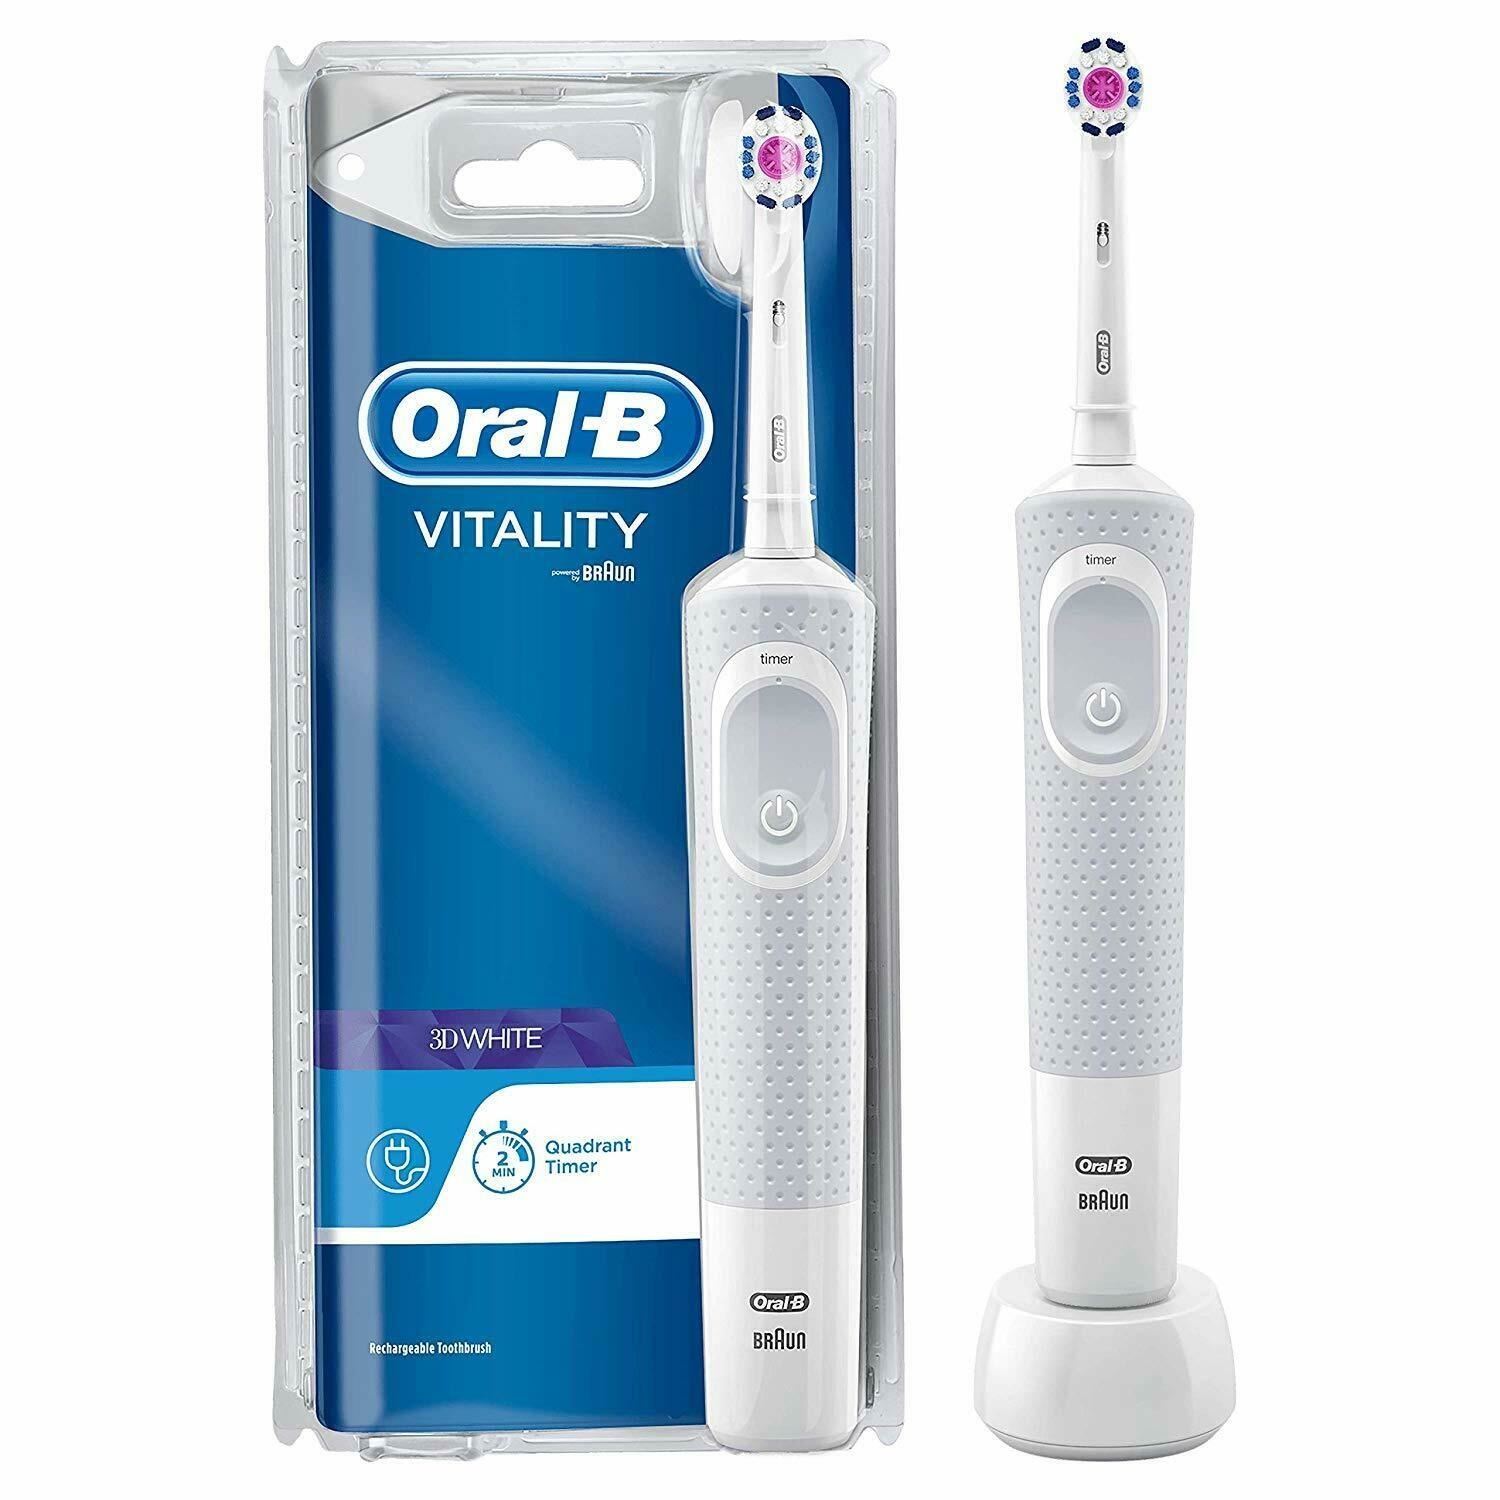 Oral-B Vitality Pro 3D White Electric Rechargeable Toothbrush With Timer White